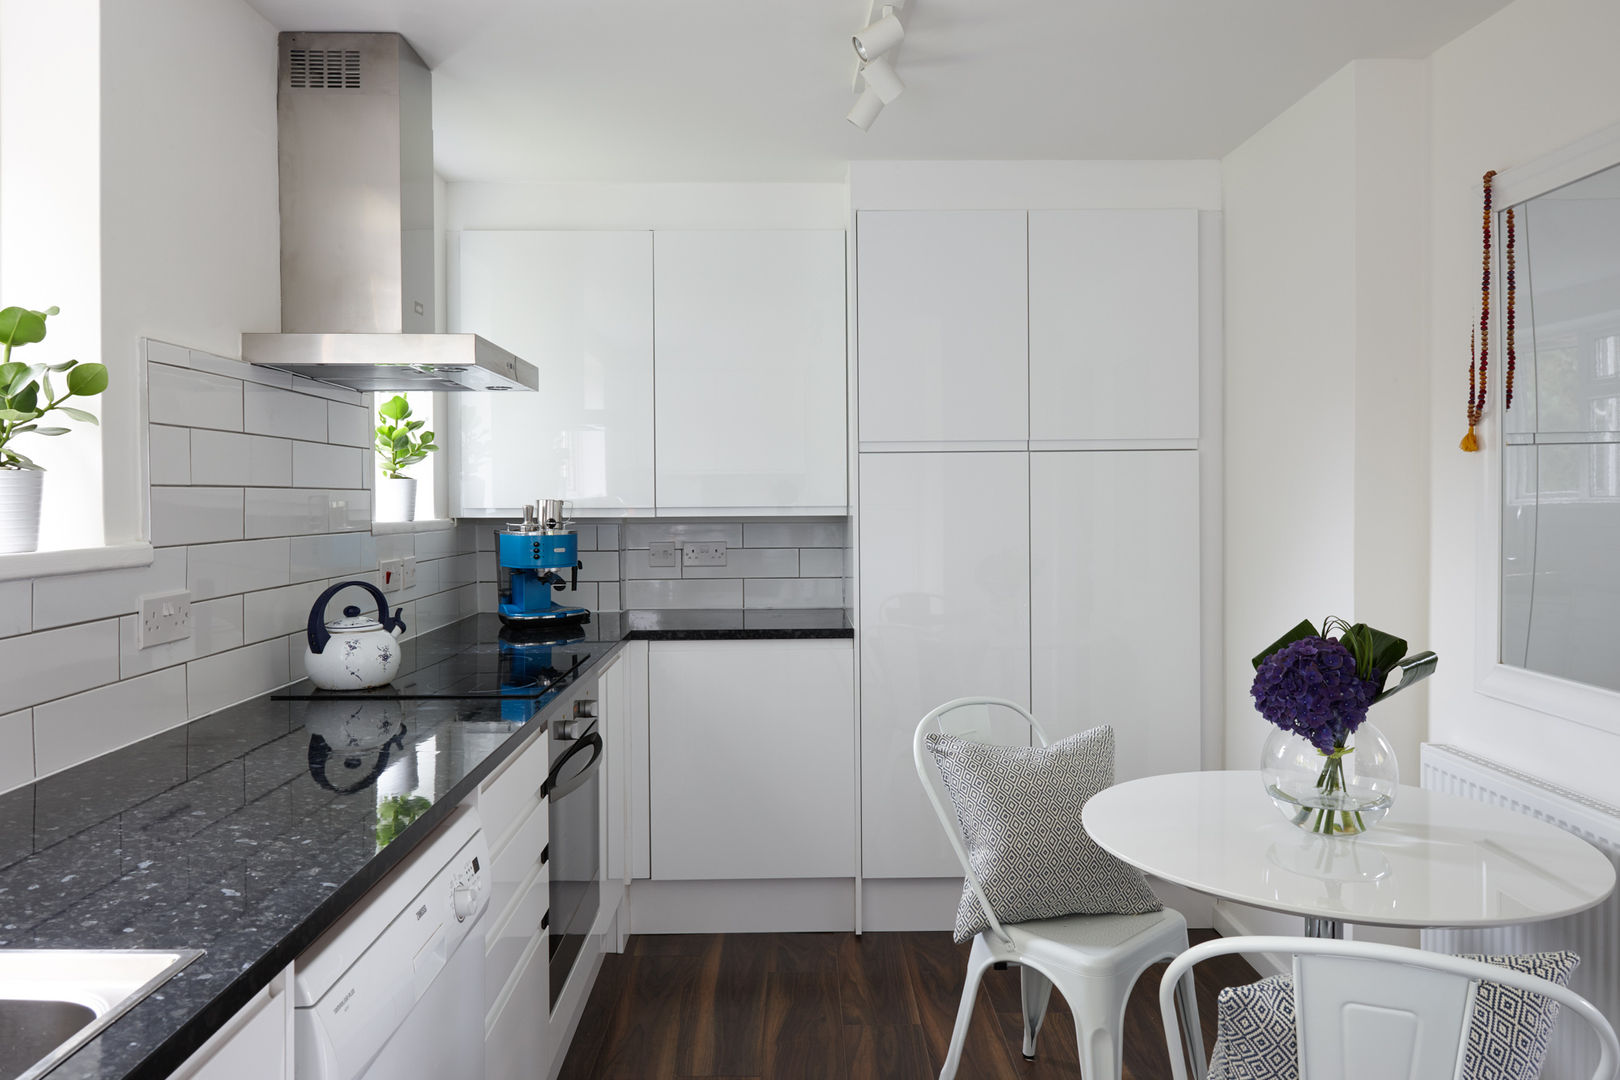 Virginia Water Apartment - Surrey Bhavin Taylor Design Modern Mutfak kitchen,white,high gloss,blue,black,dining table,dining chairs,kettle,coffee machine,extractor fan